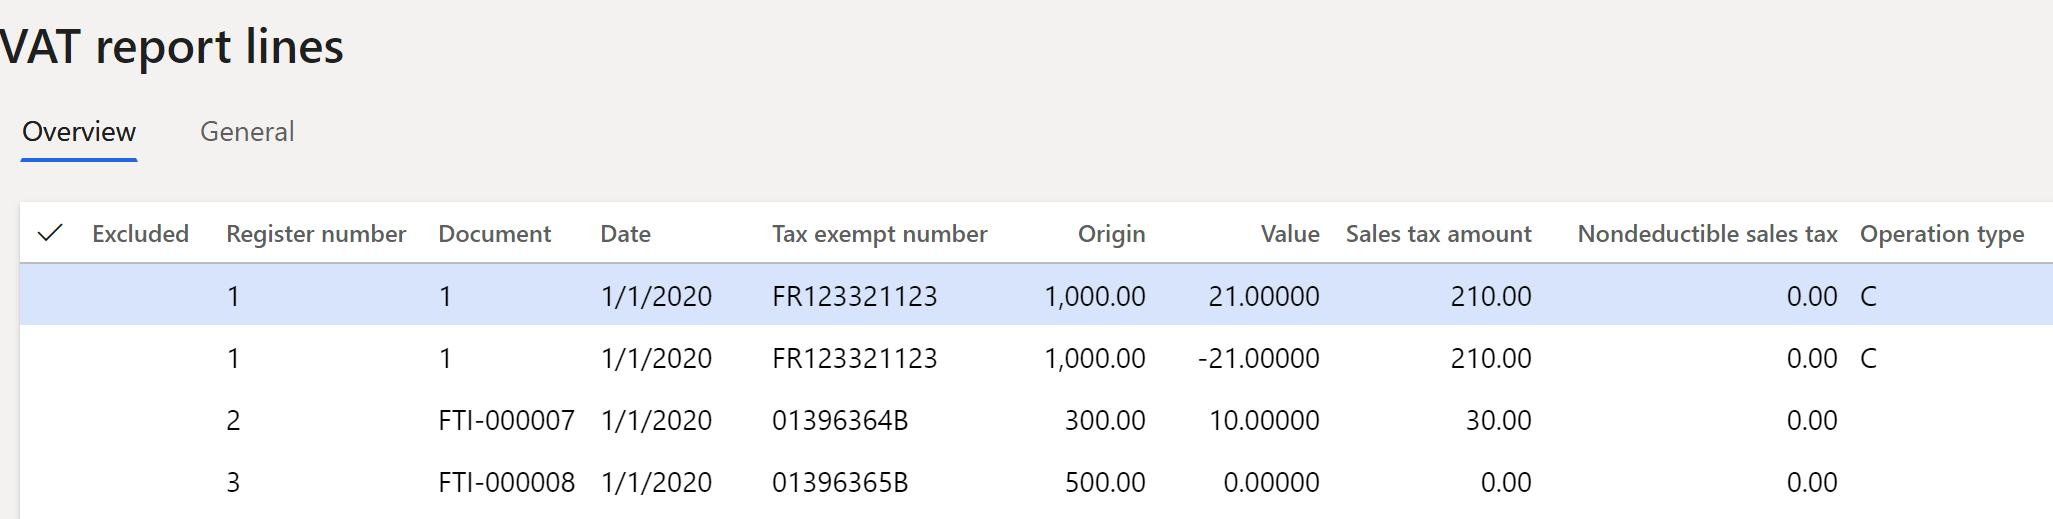 Generated data on VAT report lines page.